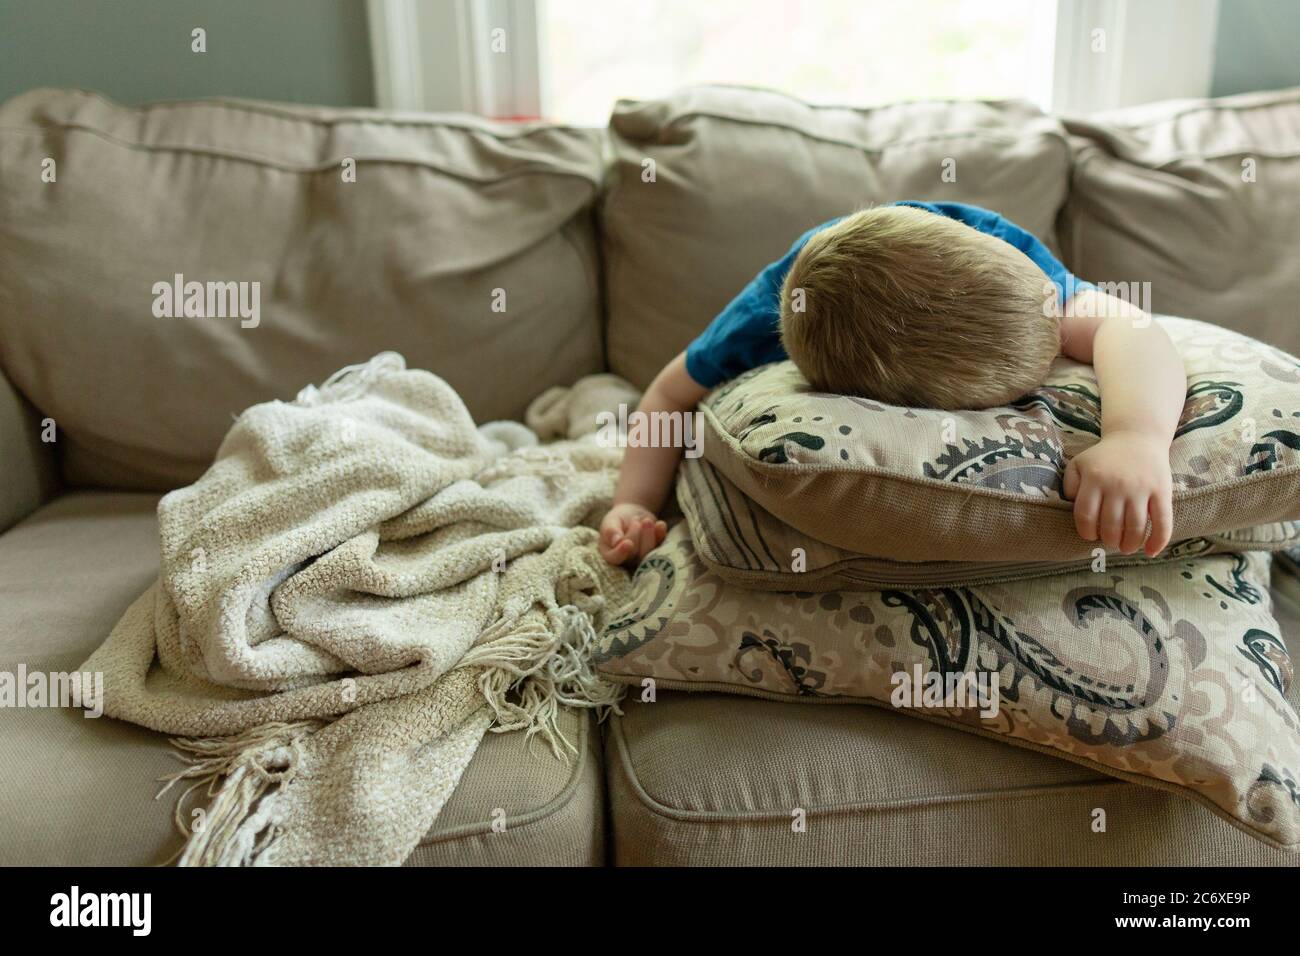 Tired young child asleep at home on couch lying on stacked pillows Stock Photo